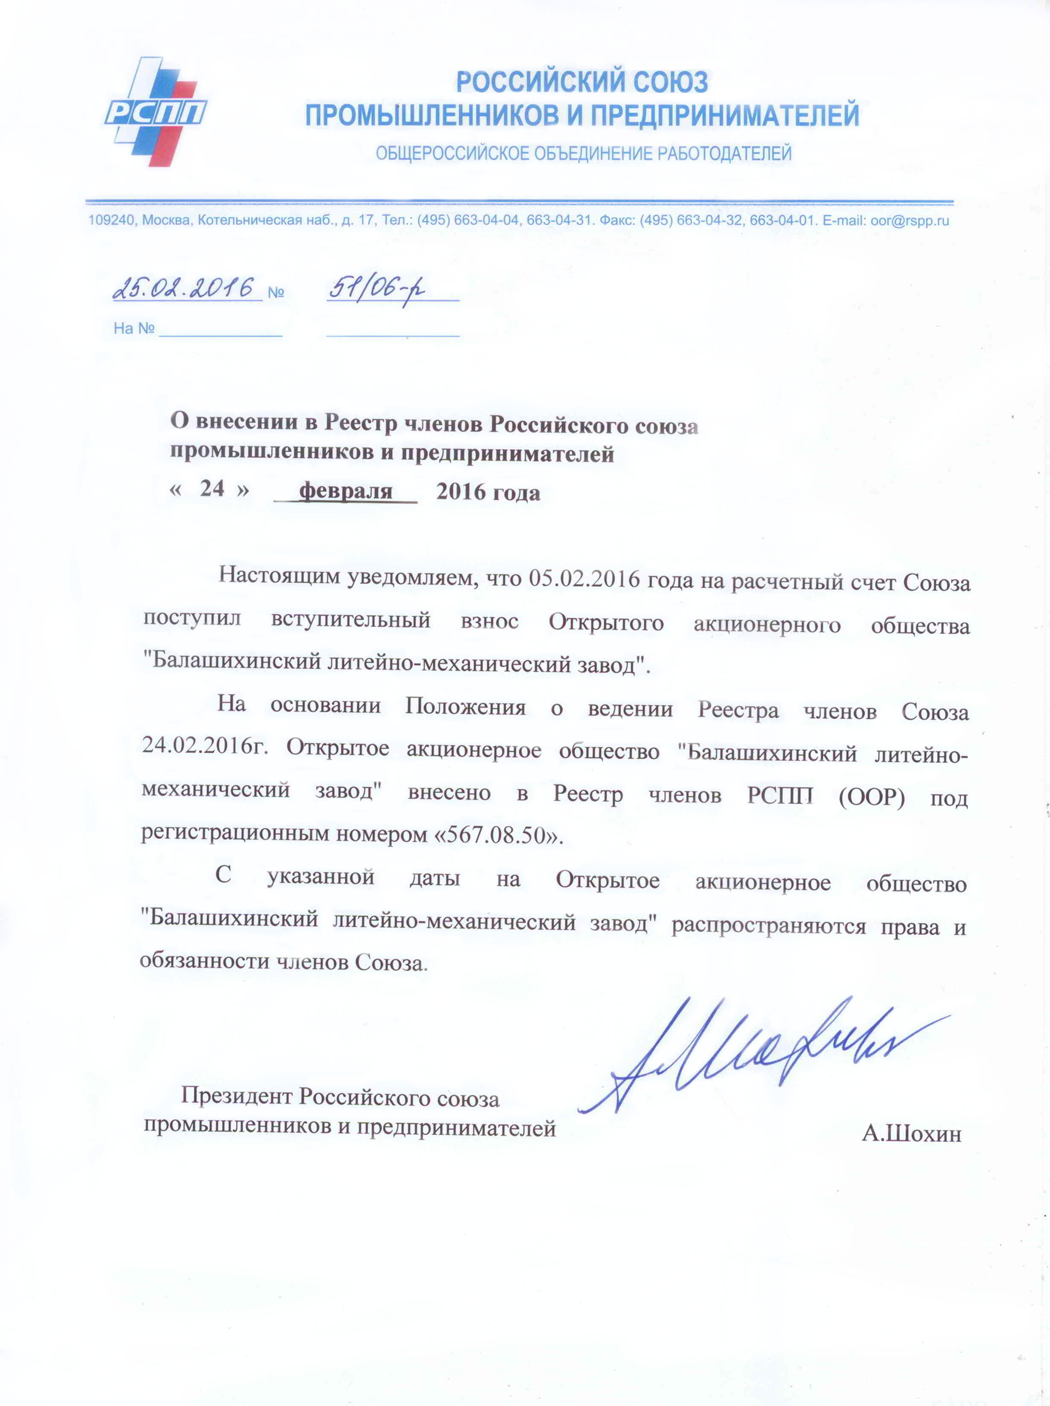 The letter on entering into the register of members of The Russian Union of Industrialists and entrepreneurs (RSPP) - JSC BLMZ. Moscow 2016